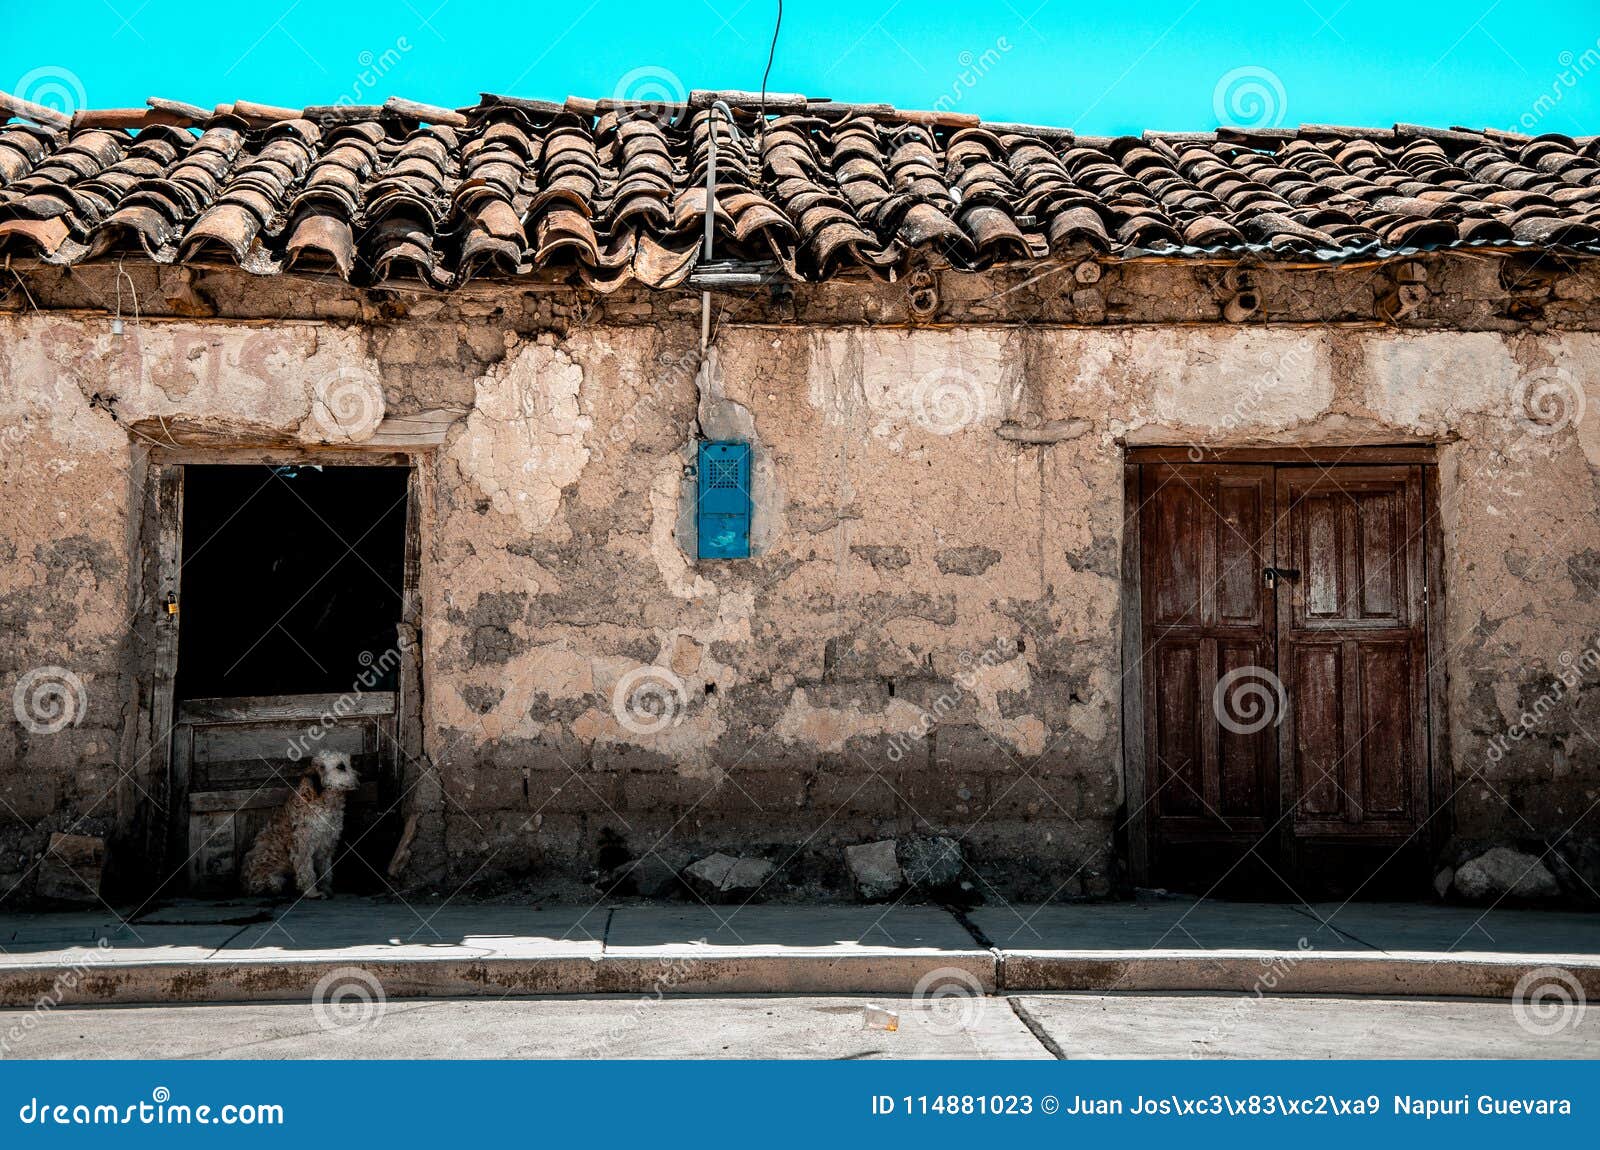 an old house in ayacucho - peru